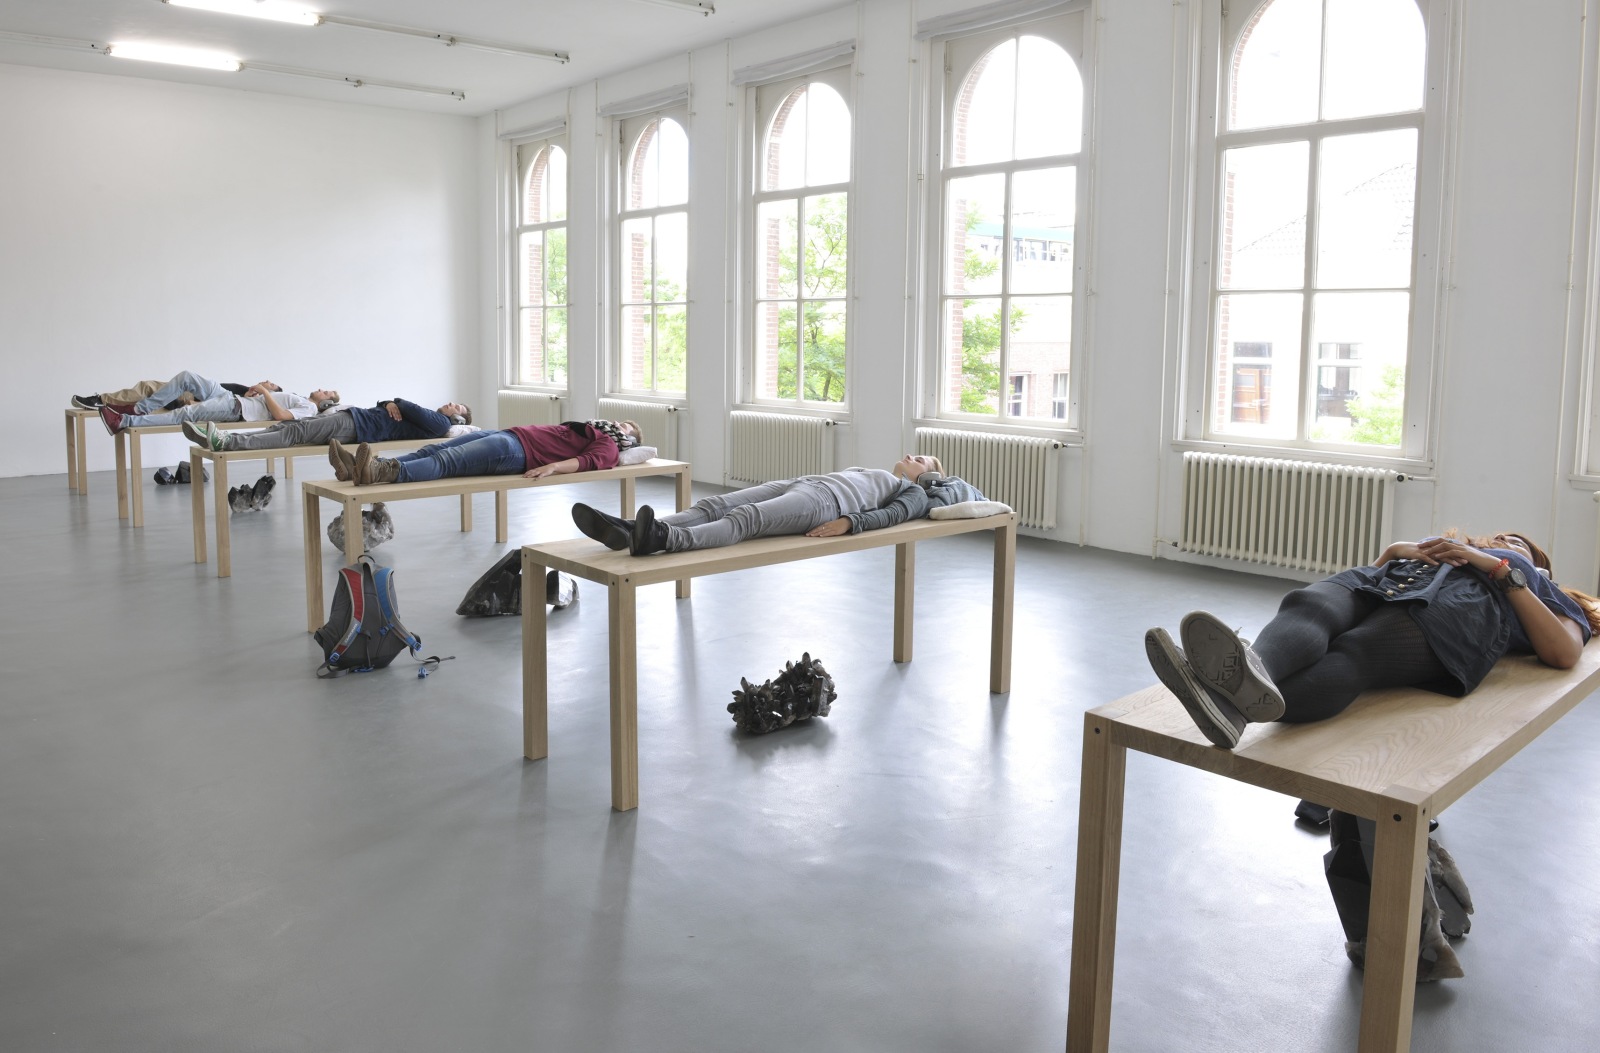 <div class="image_caption_container"><div class="image_caption"><p>Marina Abramovic, <strong>Transitory Objects: Beds for Human Use</strong>, 2012</p><p><strong>The Temptation of AA Bronson</strong>, Witte de With, Center for Contemporary Art, Rotterdam, 2014</p><p>© Bob Goedewaagen</p></div></div>